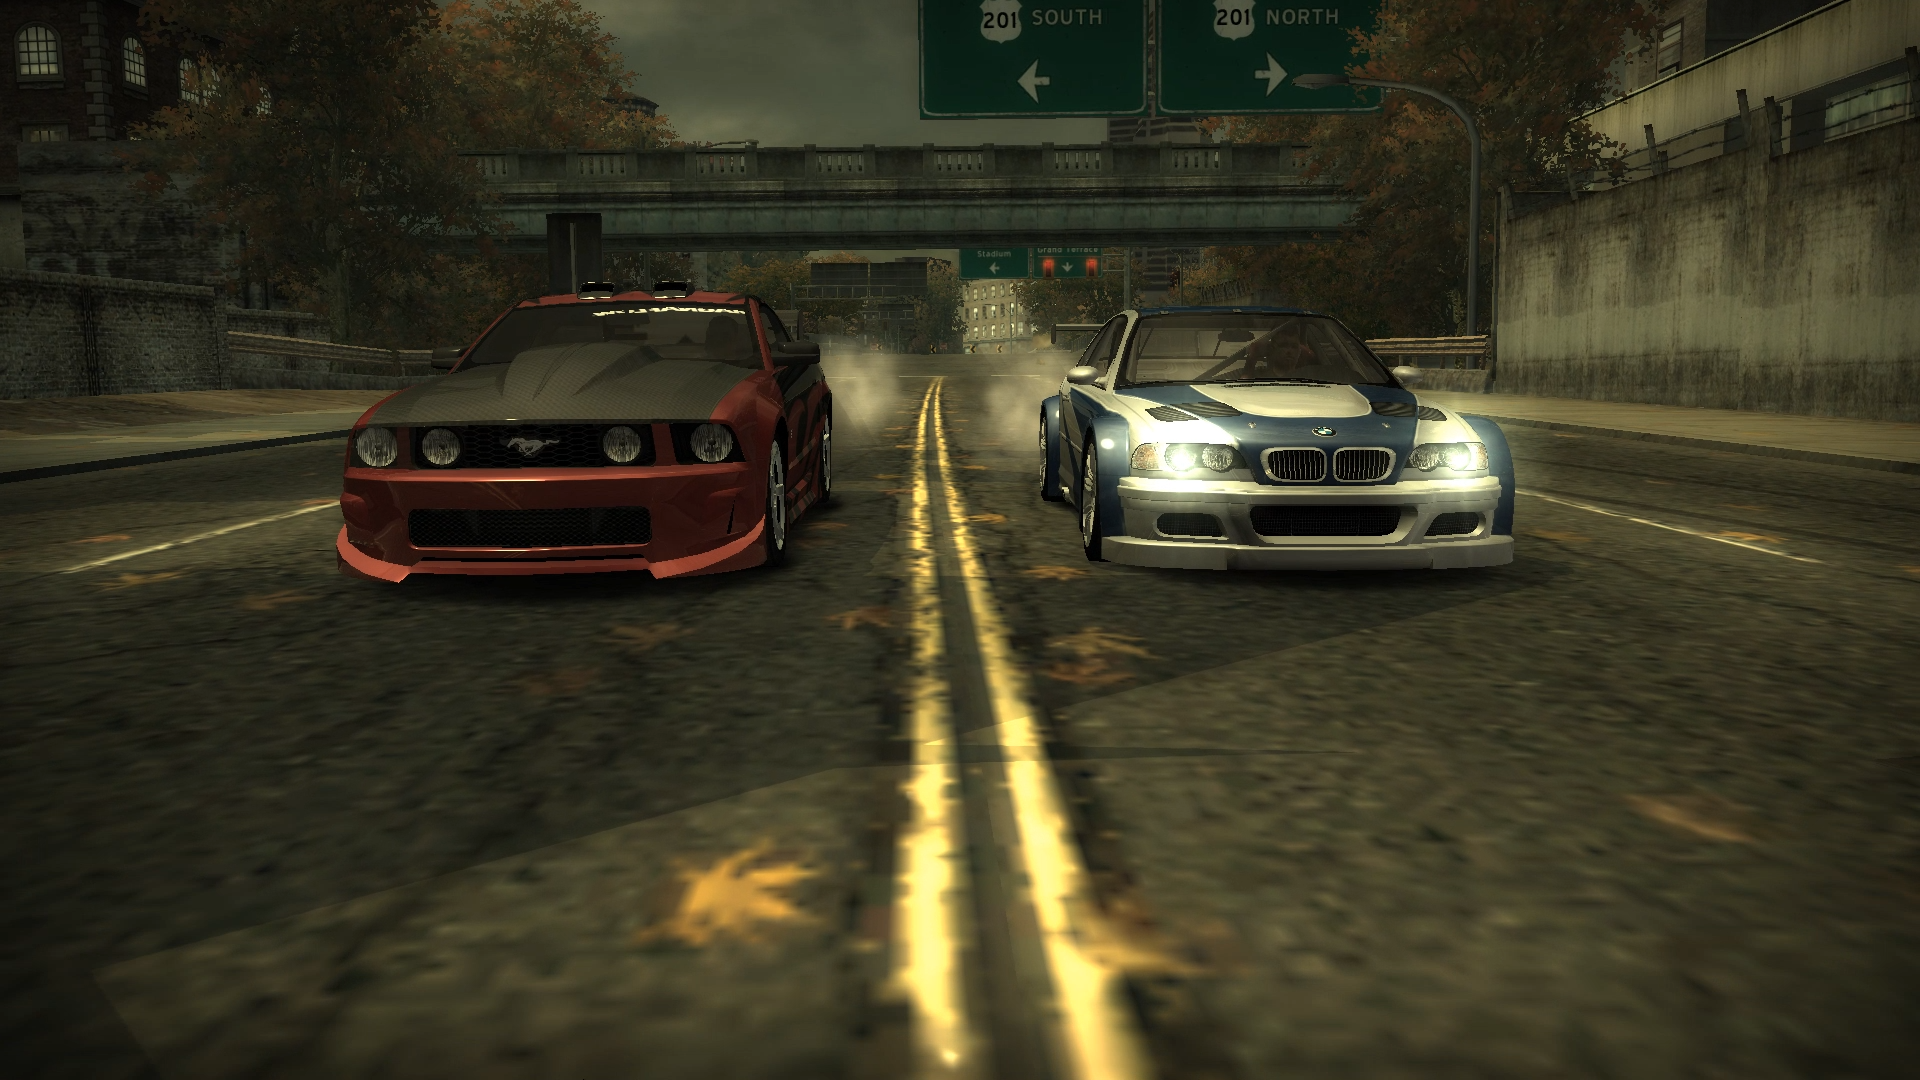 Nfs mw 2. Need for Speed most wanted 2005. Need for Speed most wanted 2005 погоня. NFS most wanted 2012 погоня. NFS MW 2005.